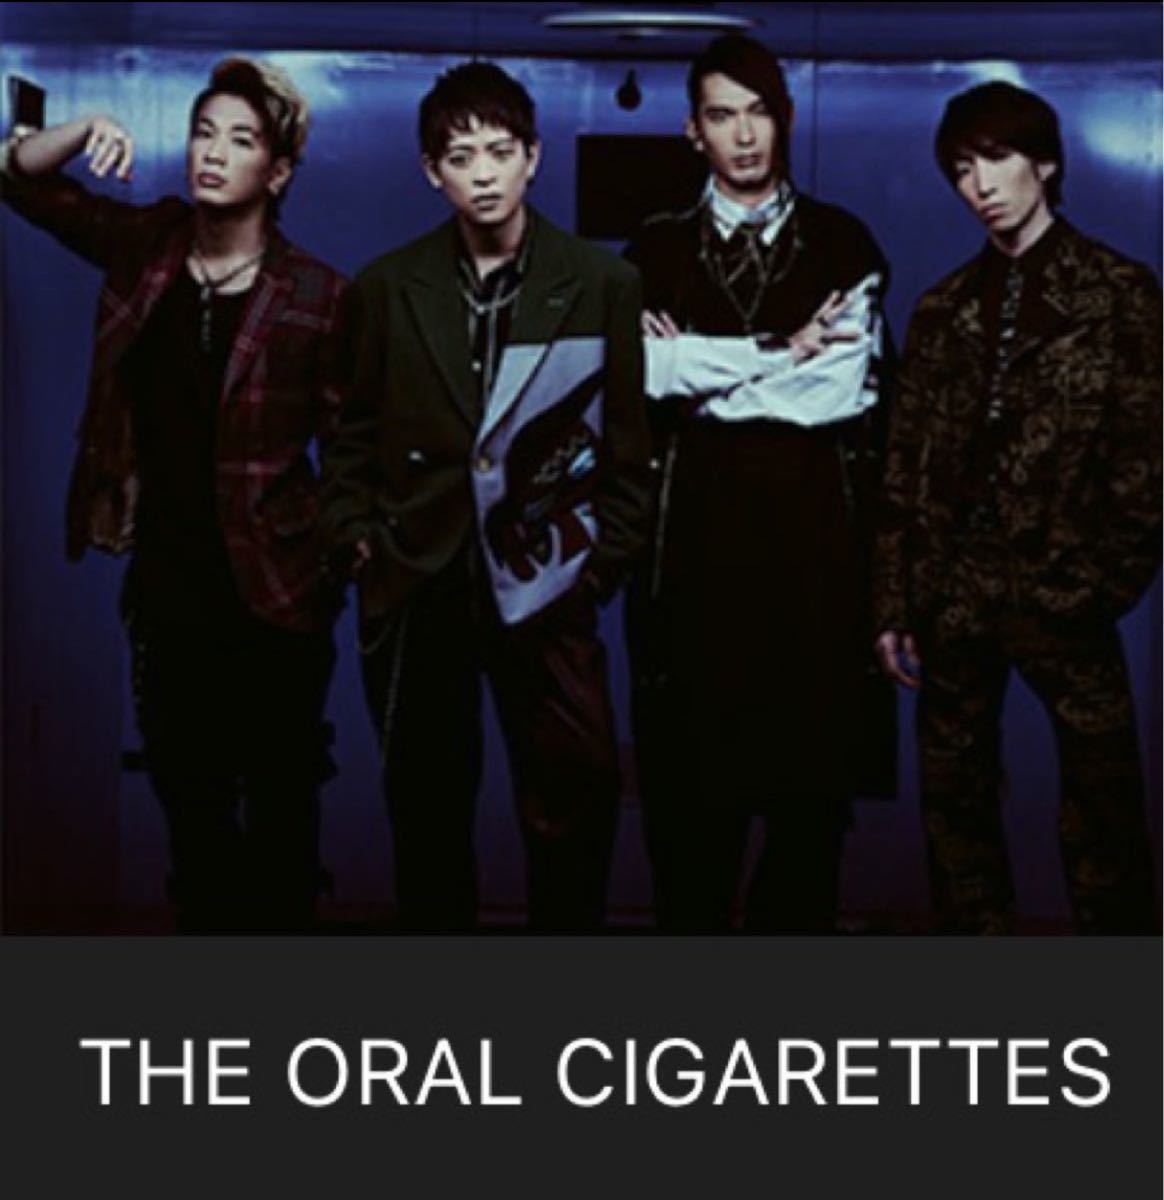 The BKW Show!! THE ORAL CIGARETTES CD